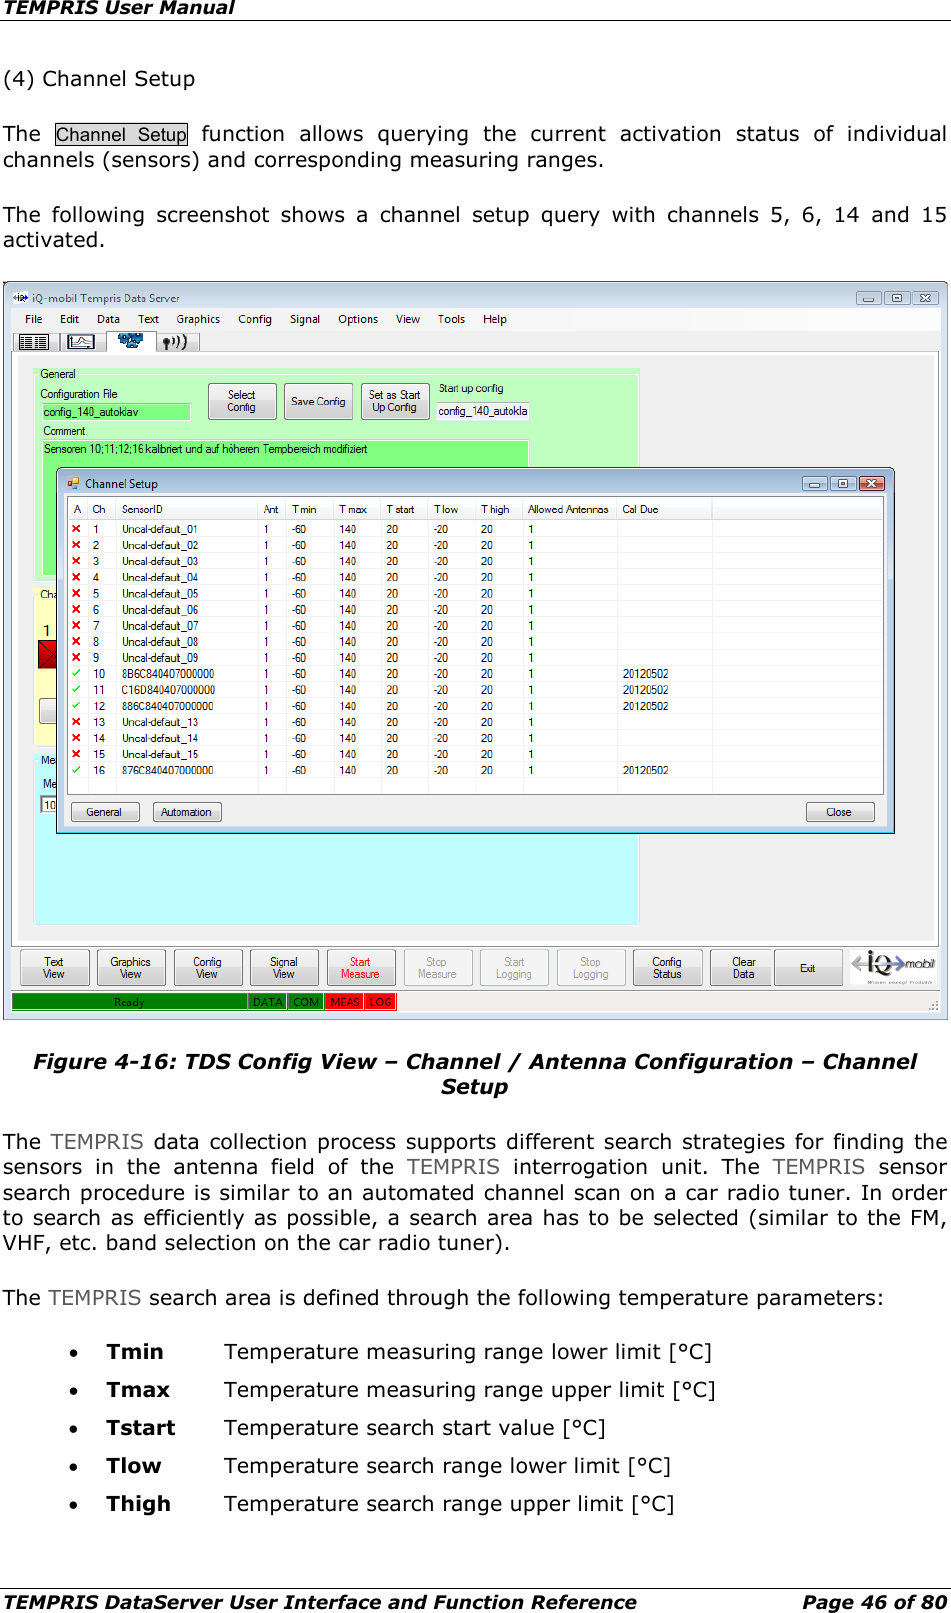 TEMPRIS User Manual TEMPRIS DataServer User Interface and Function Reference Page 46 of 80 (4) Channel Setup The  Channel Setup function allows querying the current activation status of individual channels (sensors) and corresponding measuring ranges. The following screenshot shows a channel setup query with channels 5, 6, 14 and 15 activated.  Figure 4-16: TDS Config View – Channel / Antenna Configuration – Channel Setup The TEMPRIS data collection process supports different search strategies for finding the sensors in the antenna field of the TEMPRIS interrogation unit. The TEMPRIS sensor search procedure is similar to an automated channel scan on a car radio tuner. In order to search as efficiently as possible, a search area has to be selected (similar to the FM, VHF, etc. band selection on the car radio tuner). The TEMPRIS search area is defined through the following temperature parameters: • Tmin Temperature measuring range lower limit [°C] • Tmax Temperature measuring range upper limit [°C] • Tstart Temperature search start value [°C] • Tlow Temperature search range lower limit [°C] • Thigh Temperature search range upper limit [°C]  